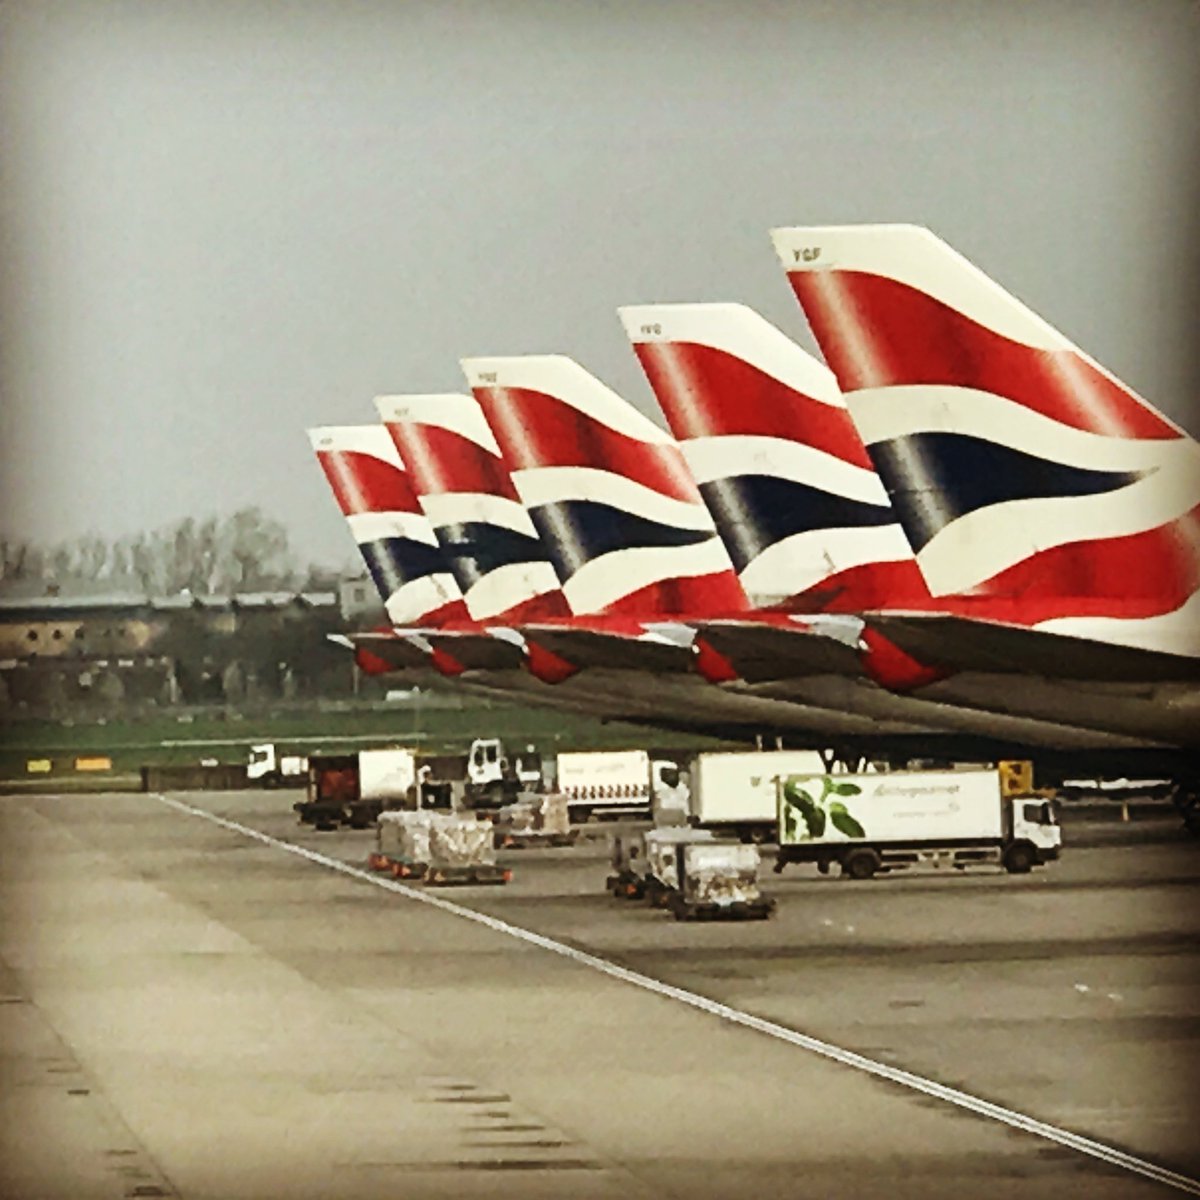 Thanks for indulging my meander down memory lane. It is slightly odd that I have such a connection to this piece of aluminium, I know. I know I will not be the only one who will miss their iconic shape and tails from  @HeathrowAirport and across the globe. #BA747  #Boeing747  #Avgeek